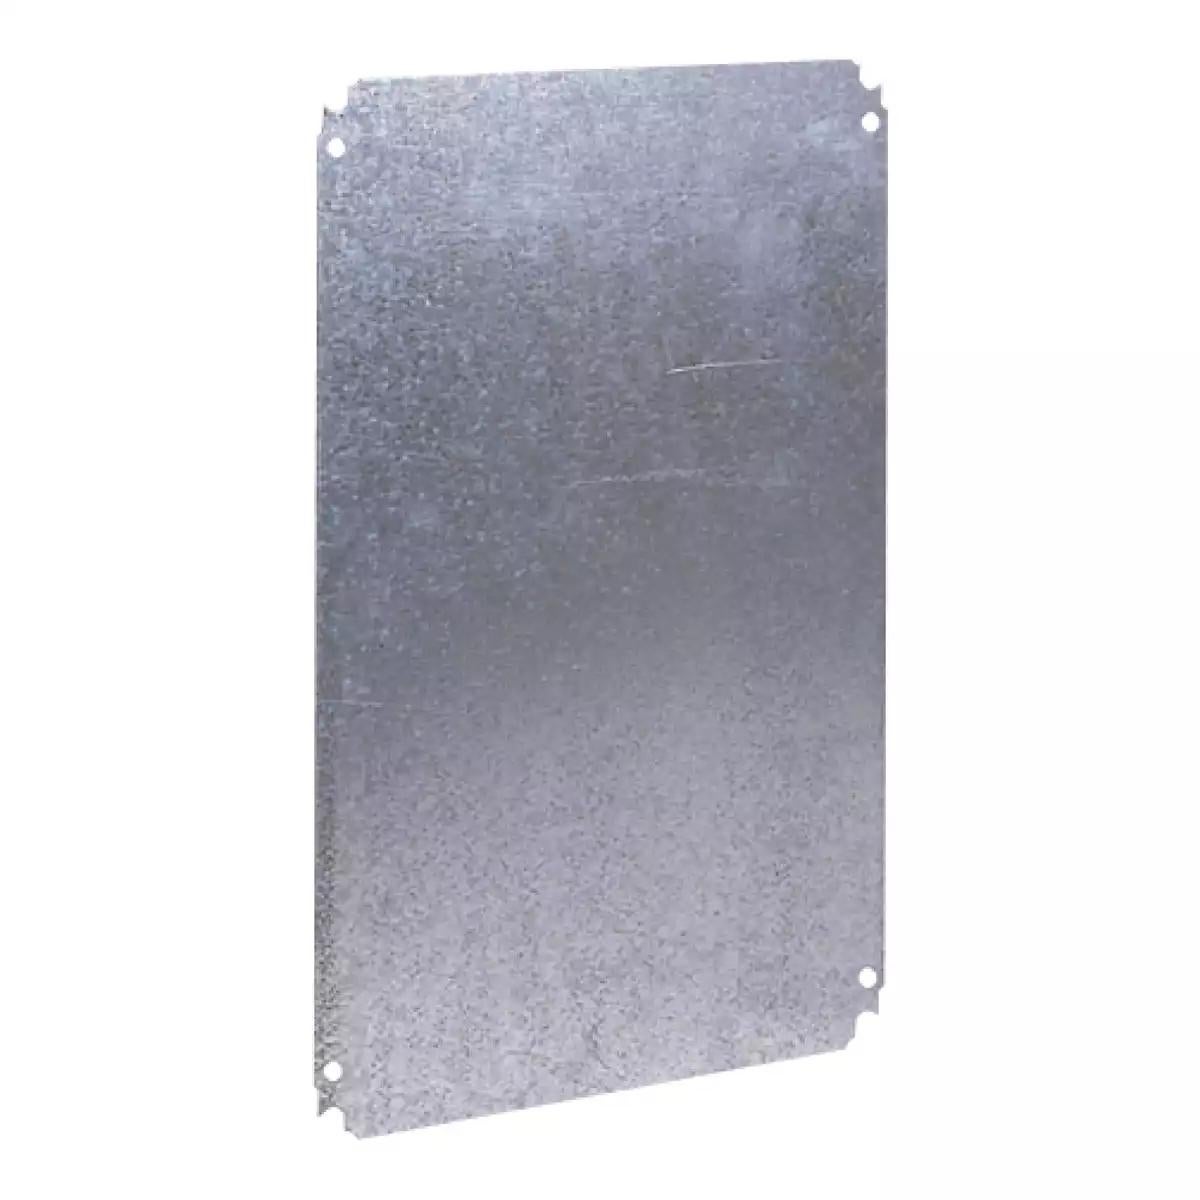 Schneider Electric Spacial CRN Plain mounting plate H600xW400mm made of galvanised sheet steel